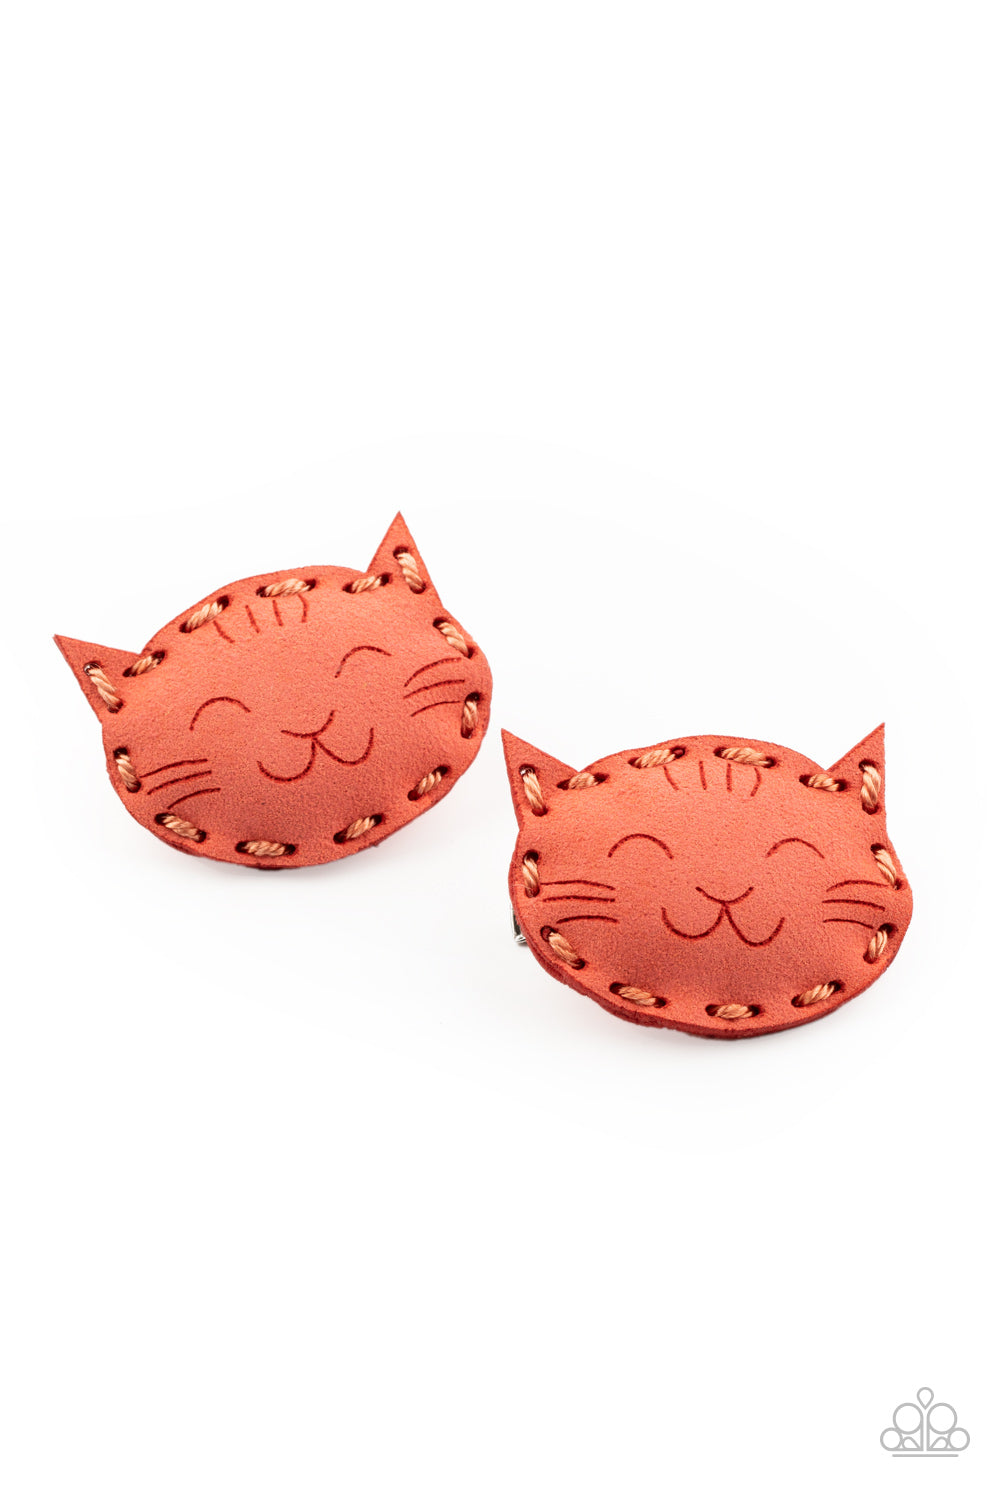 Pieces of coral suede are delicately cut and stitched into a puffy pair of cats. Features standard hair clips on the back.  Sold as one pair of hair clips.